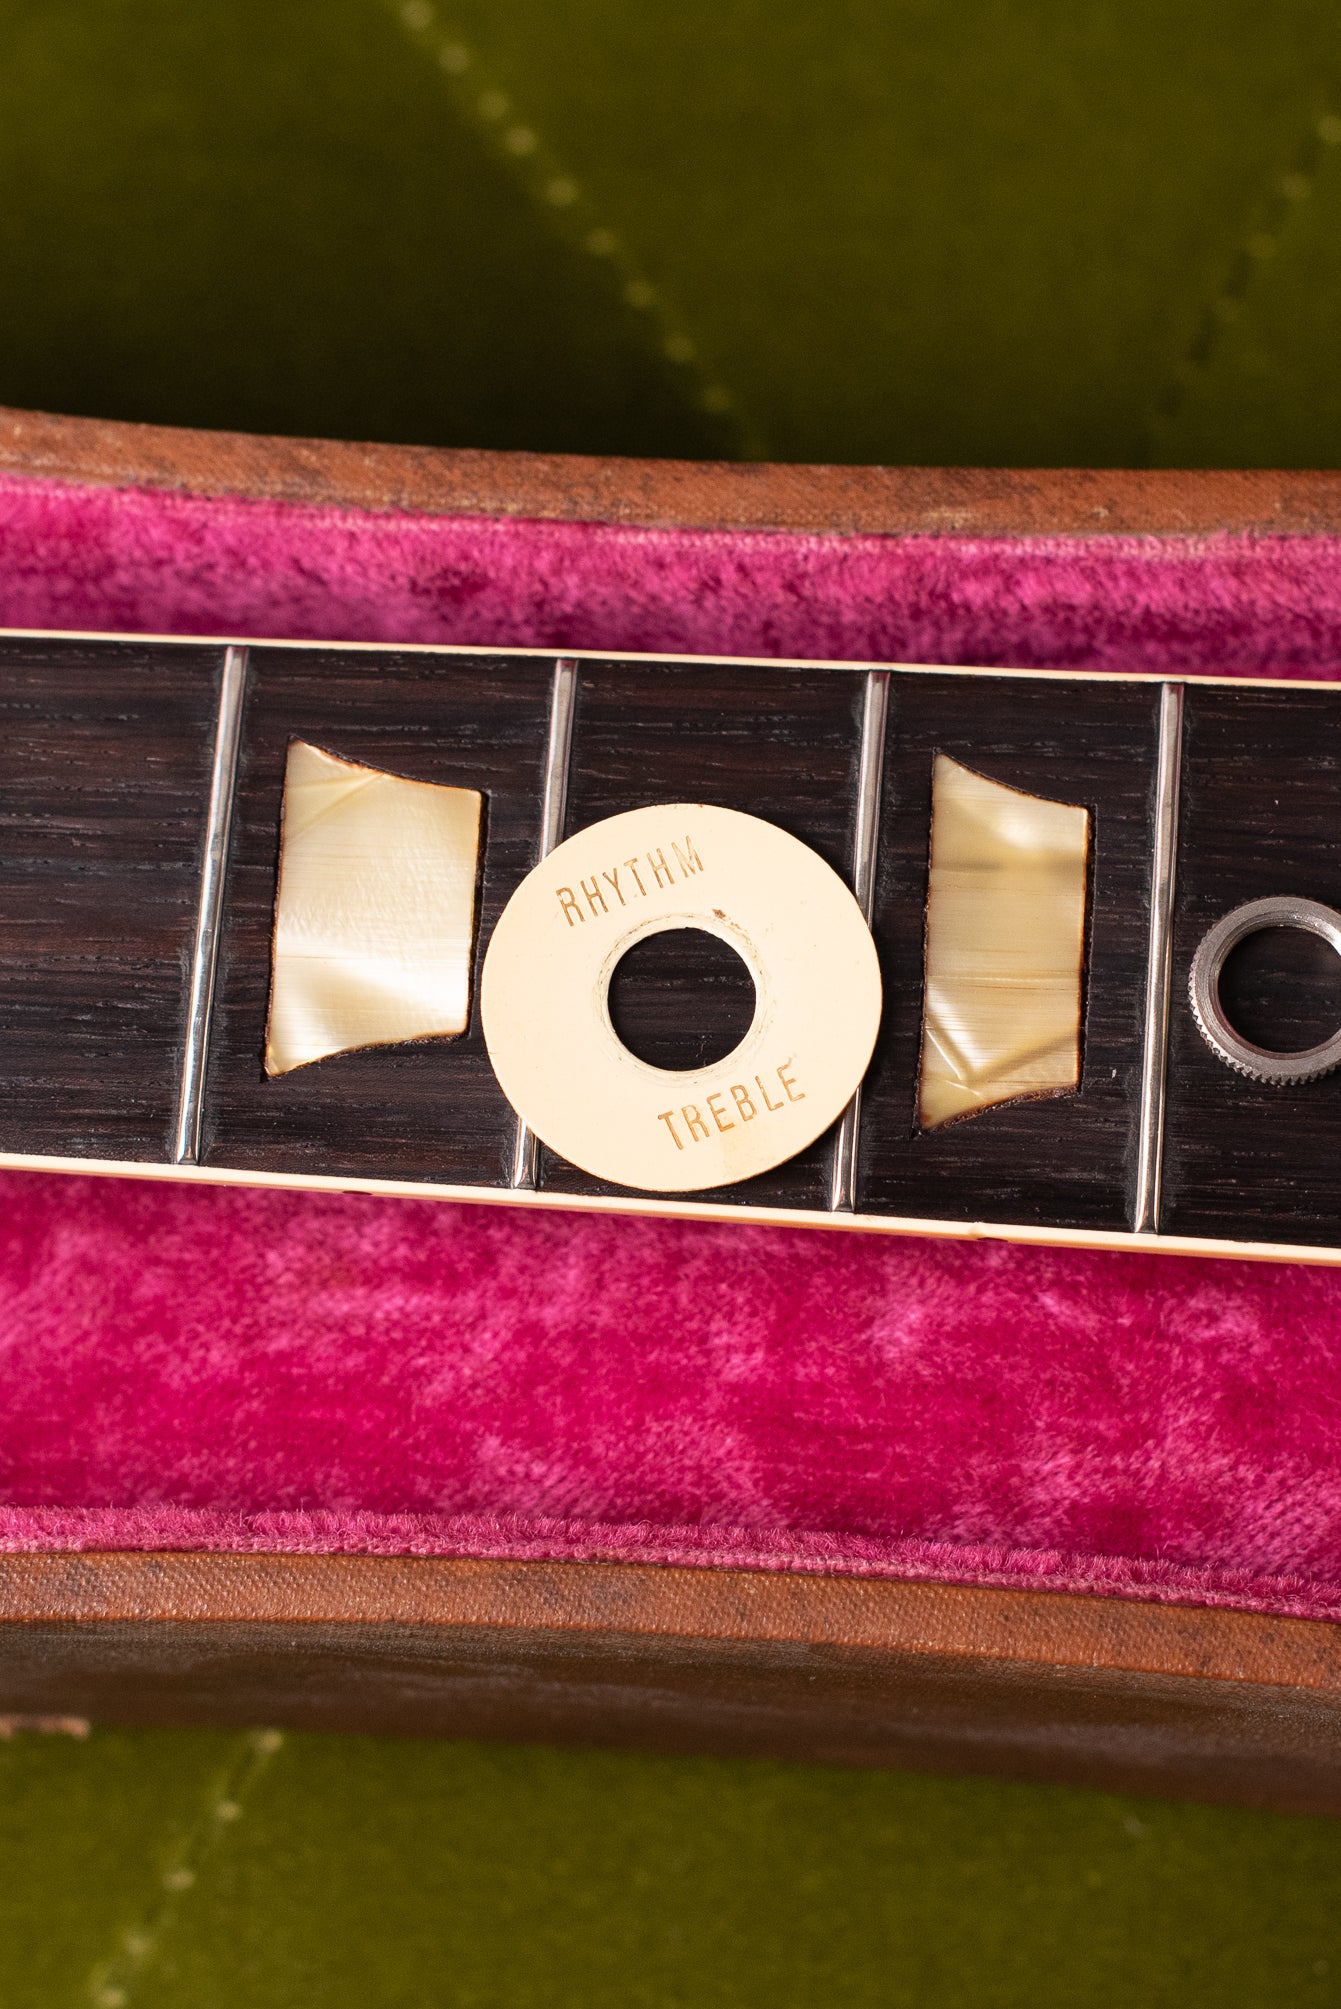 Rhythm treble switch ring, poker chip, knurled switch nut, Vintage 1954 Gibson Les Paul goldtop